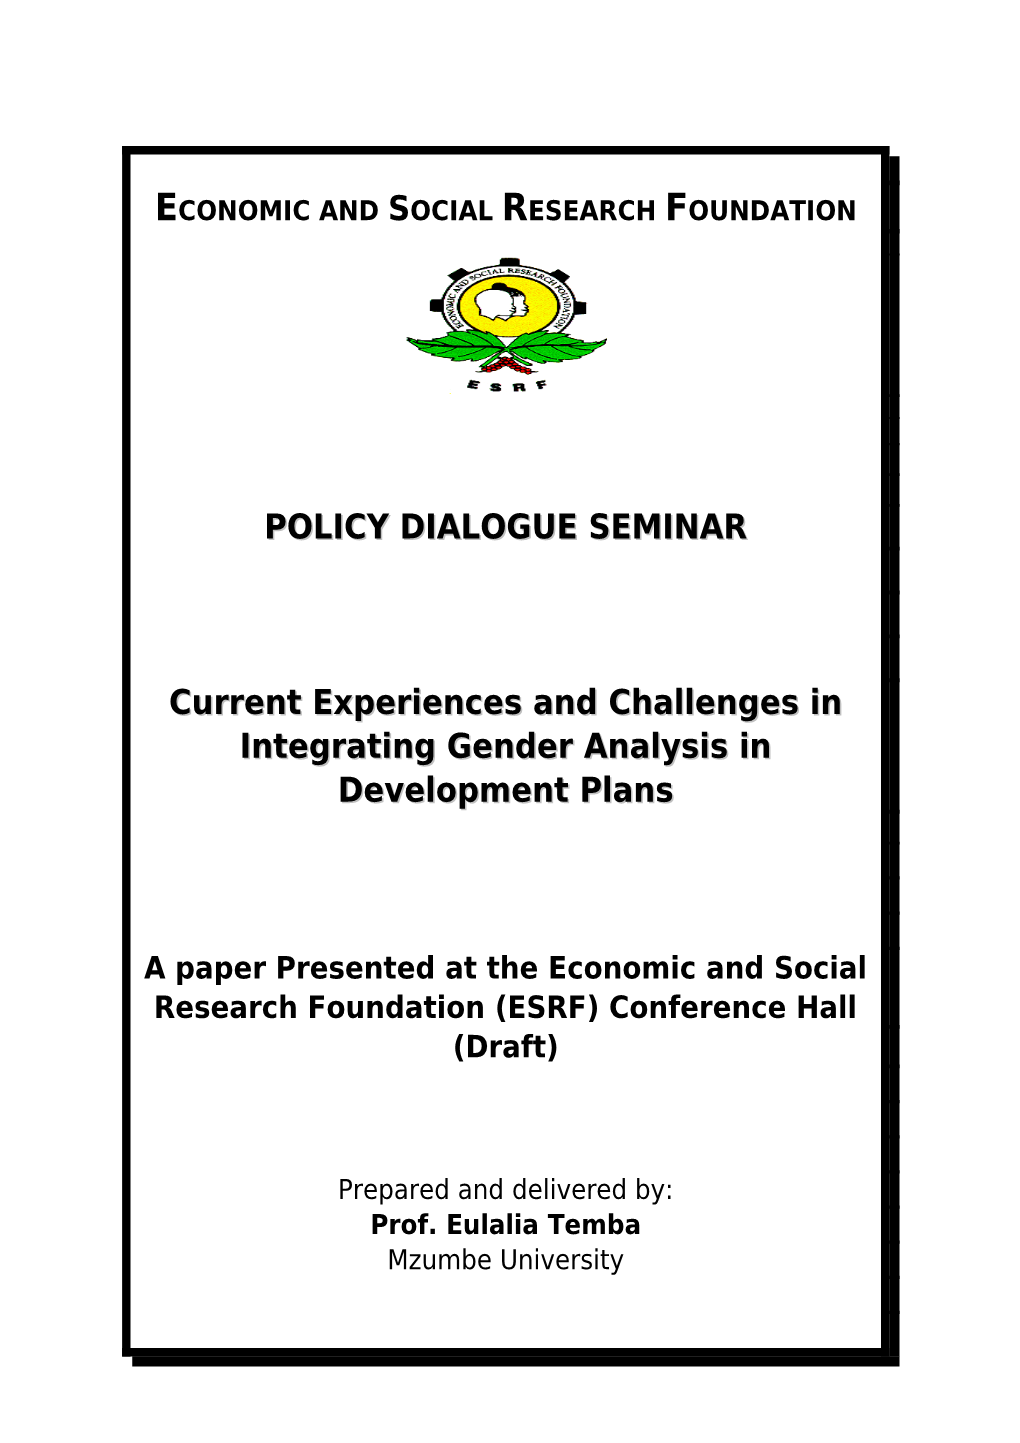 “Current Experience And Challenges In Integrating Gender Analysis In Development Plans”